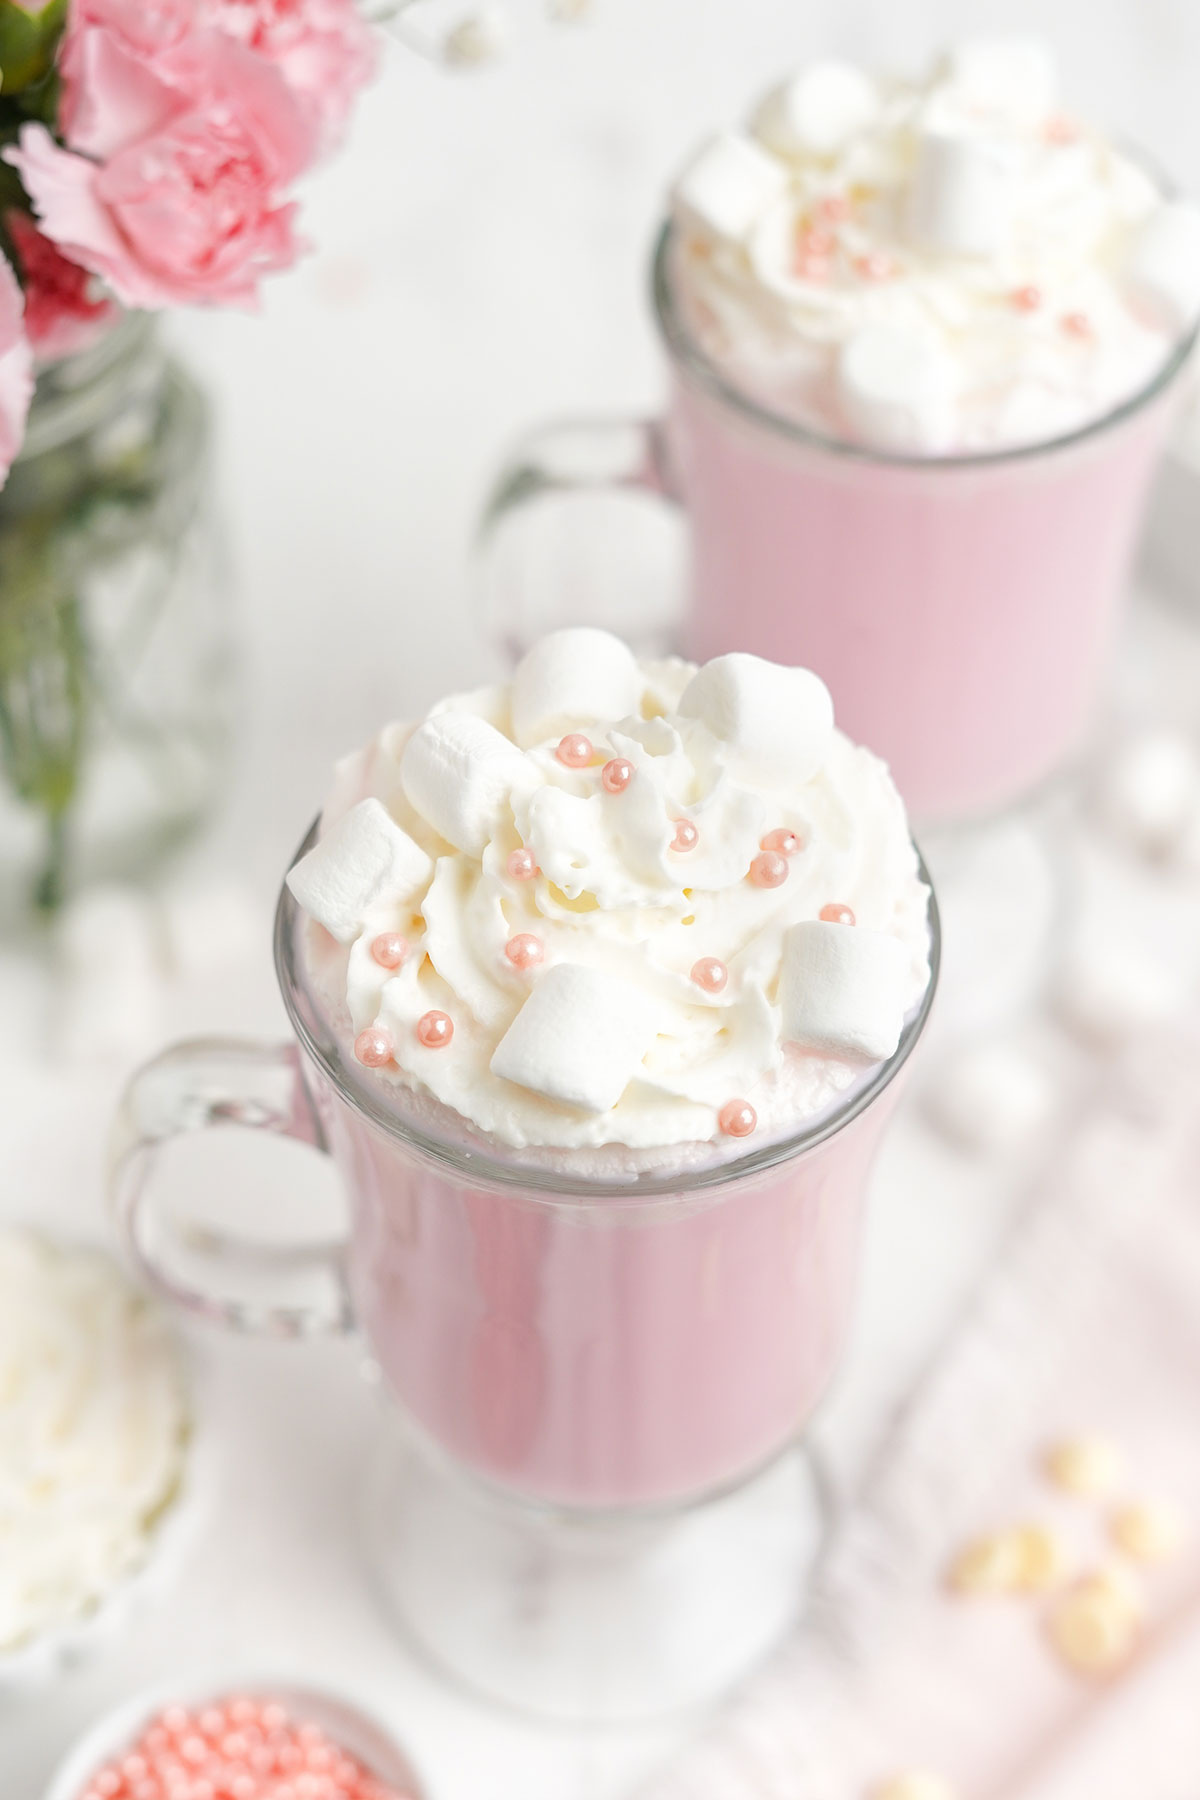 View of two mugs of pink hot chocolate topped with whipped cream.